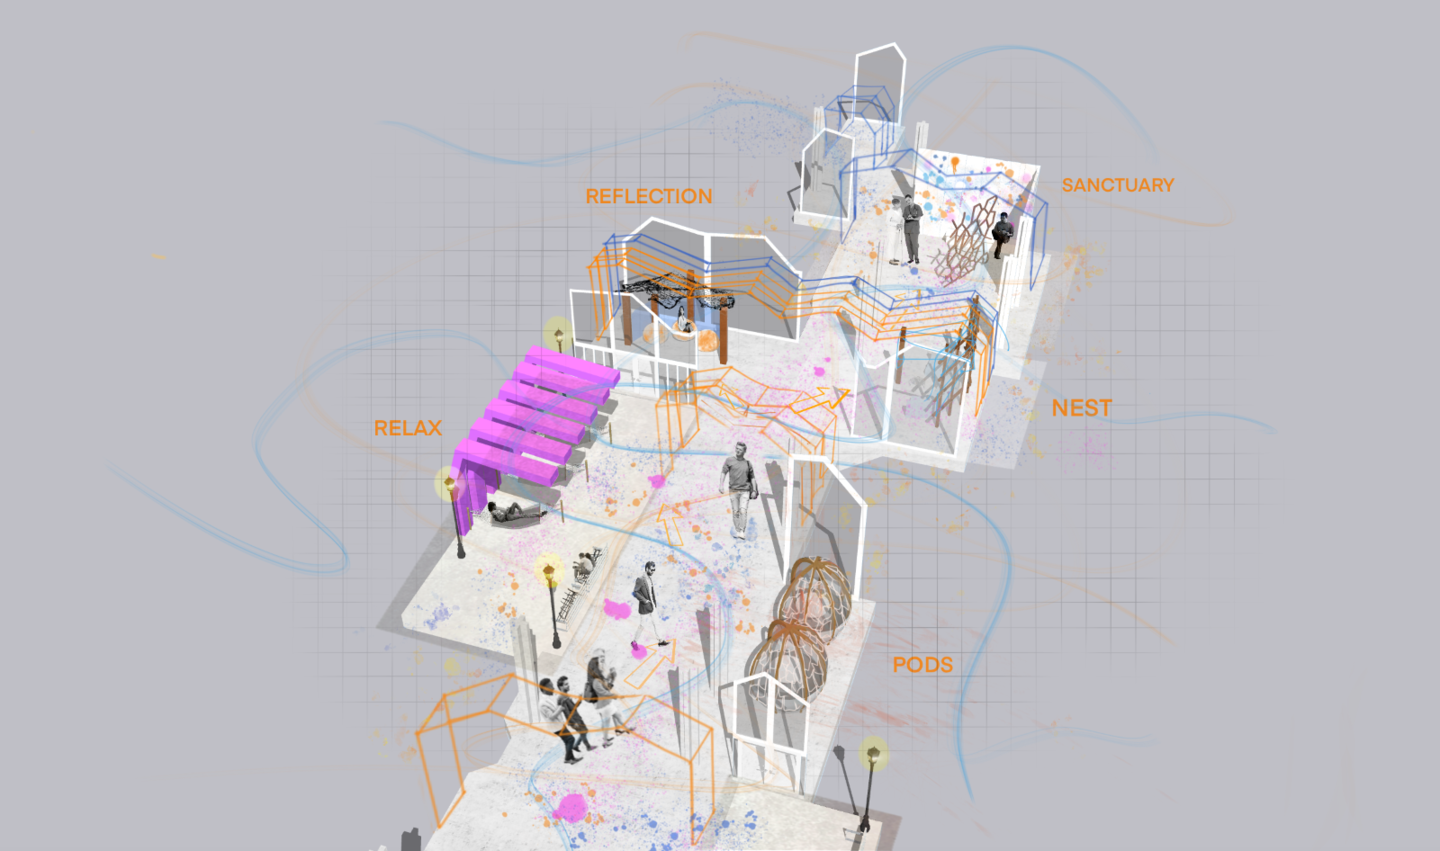 Axonometric view showing the interior of the Pods, Nest, Sanctuary, Reflection space and Outdoor Relax area